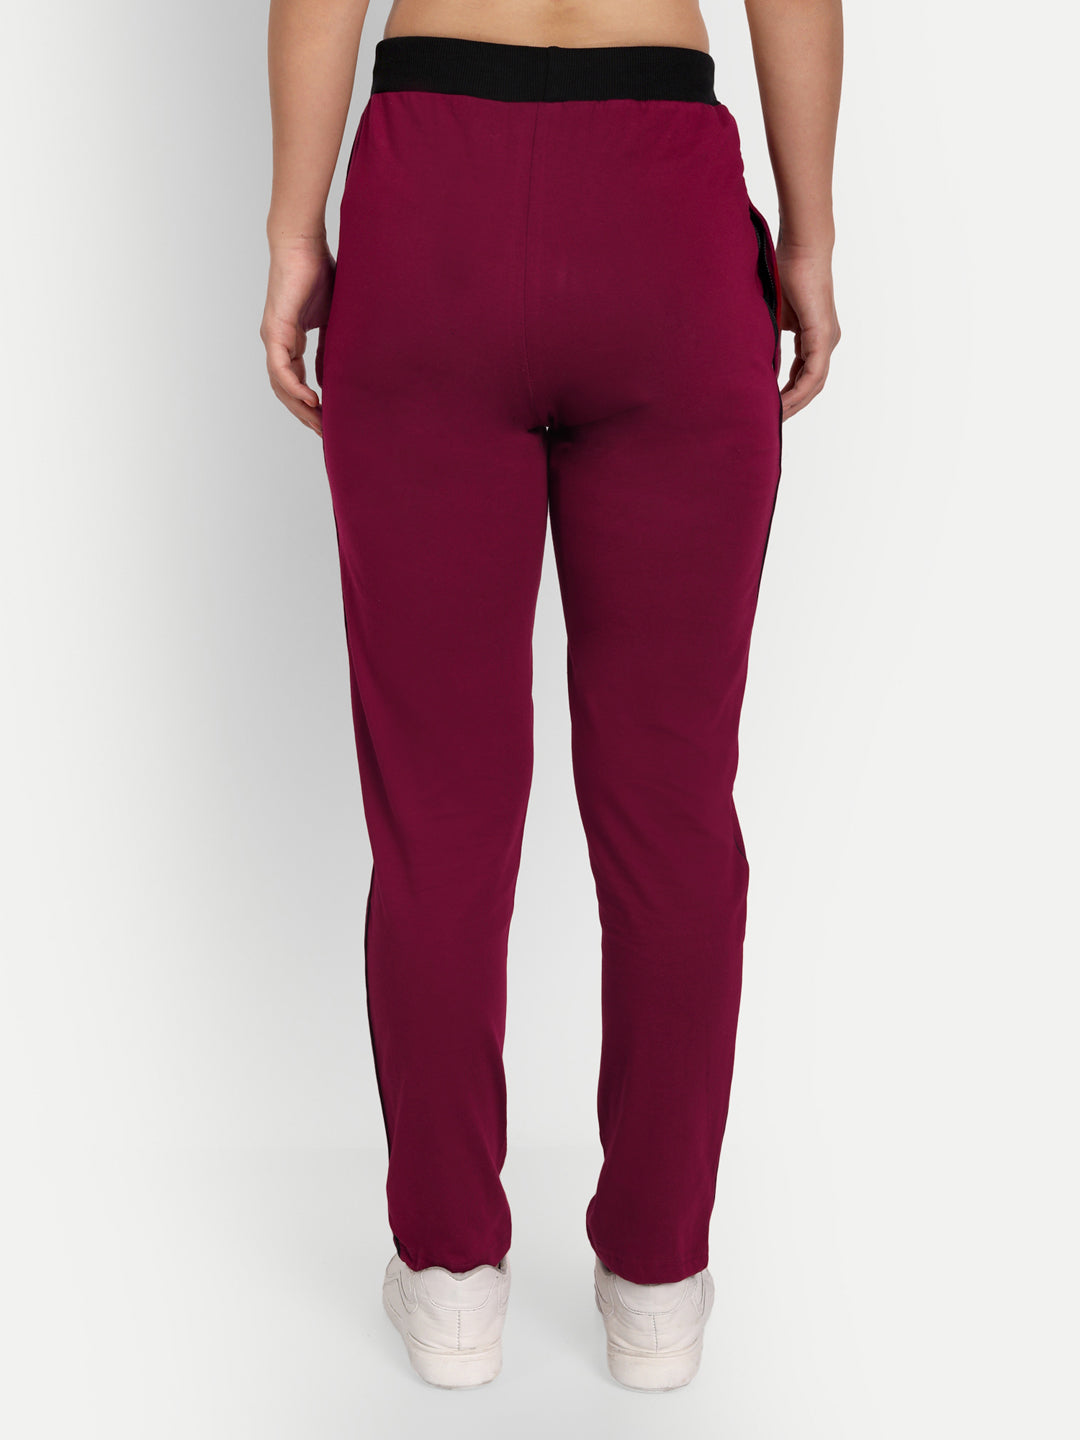 Men's burgundy joggers with stars on the sides | Golden Goose